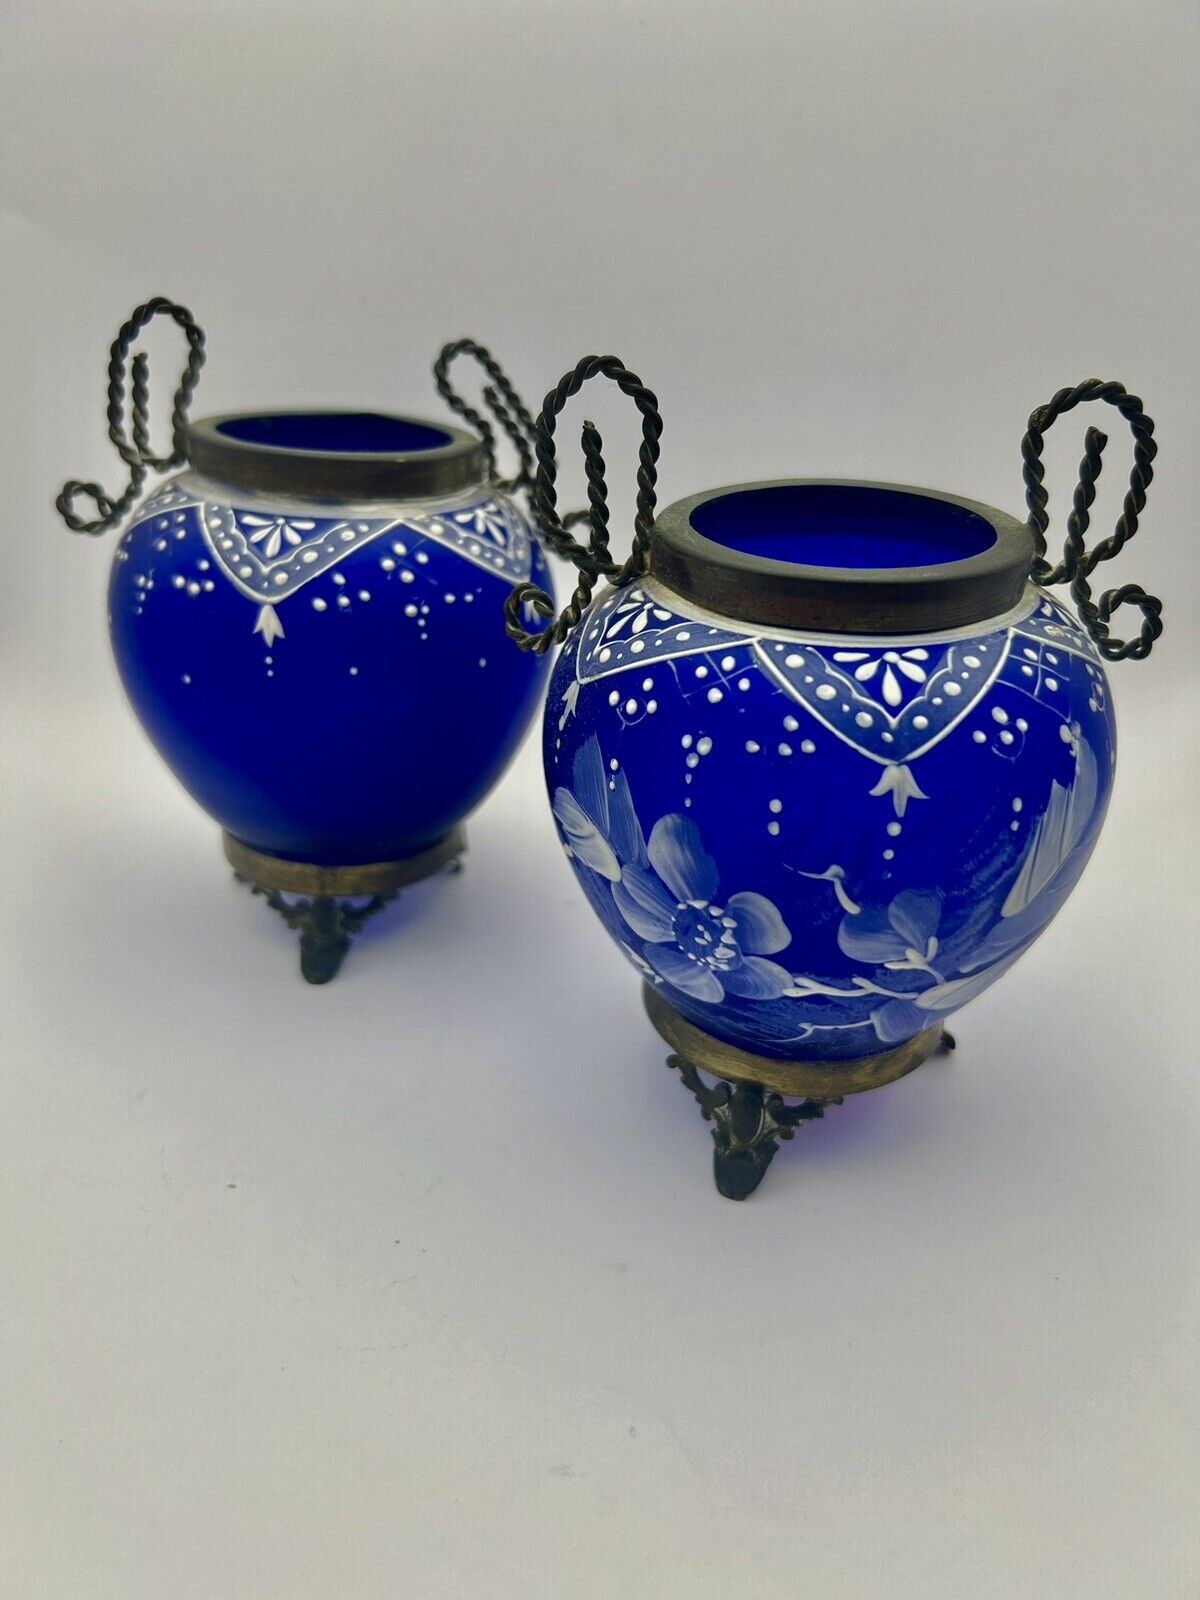 Antique, Two Small Vases, Brass Accents, Cobalt Blue, HandPainted Flowers, 5”